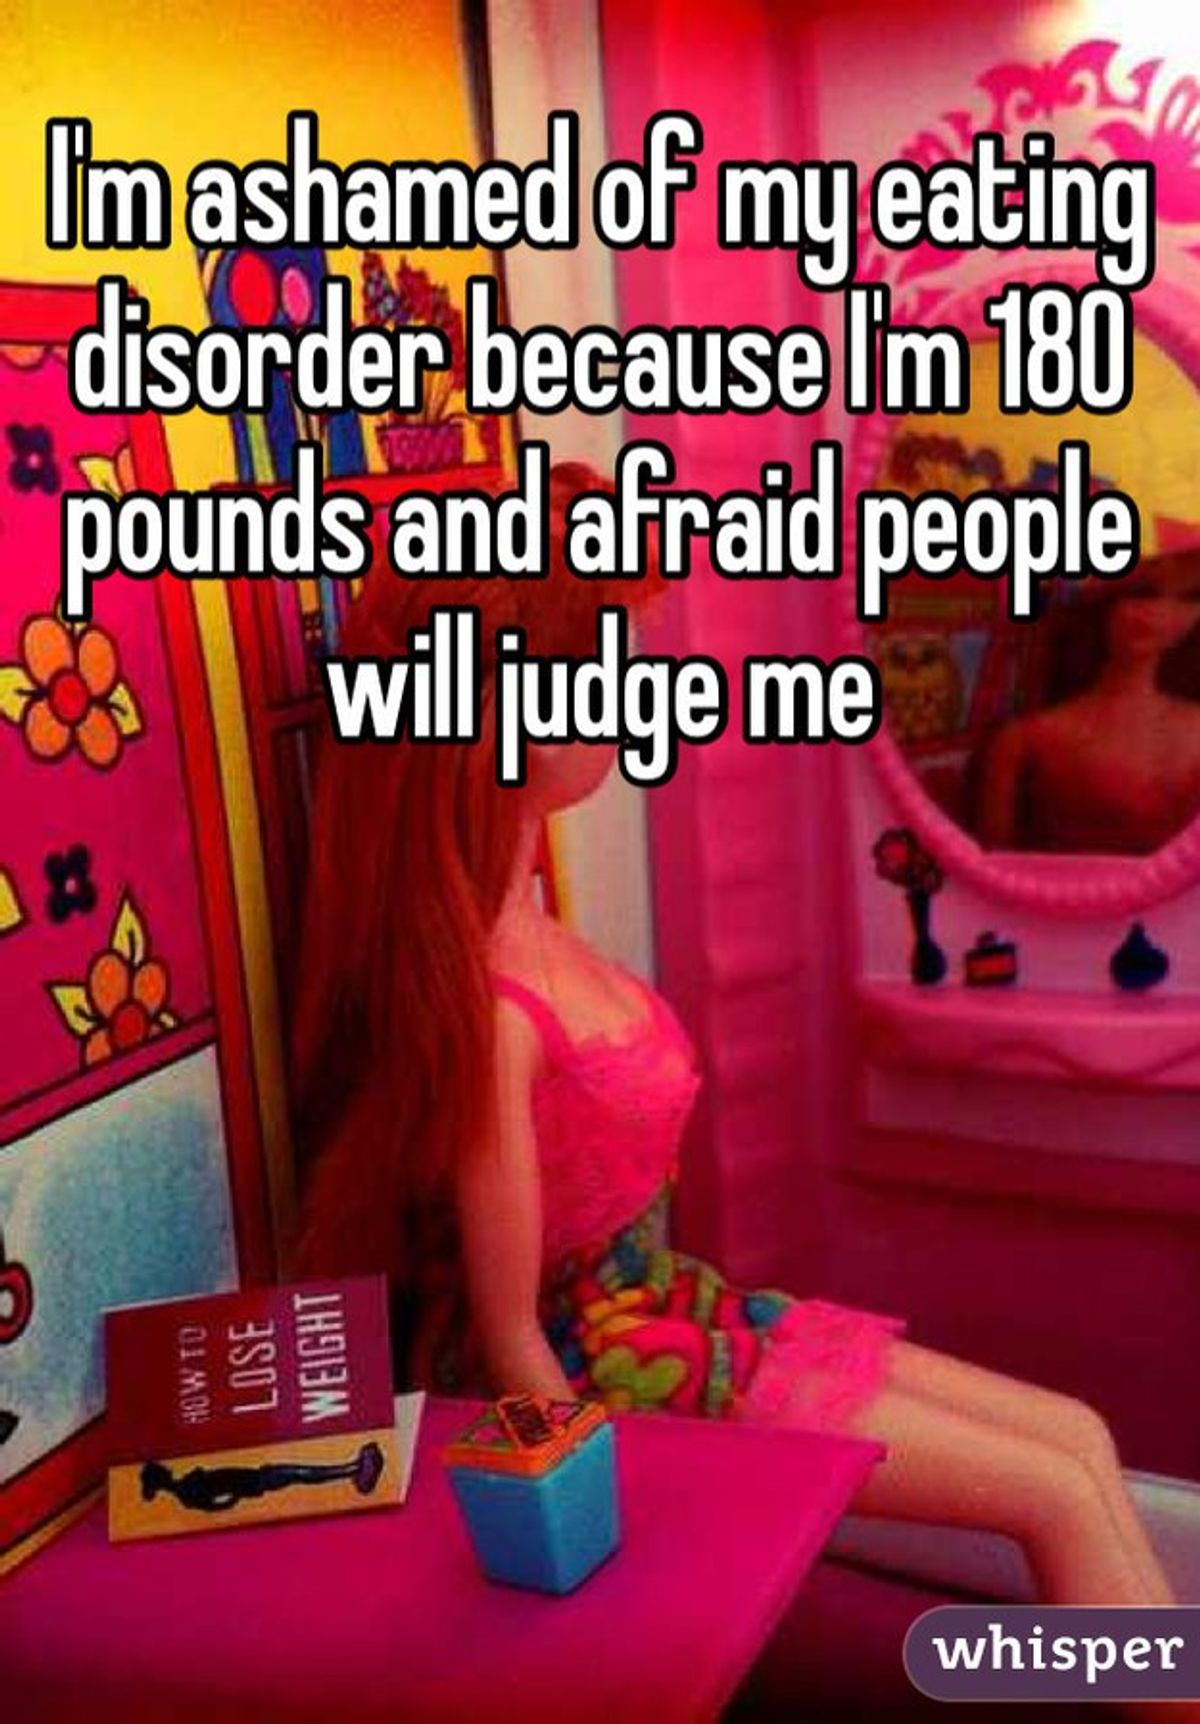 6 Myths About Eating Disorders